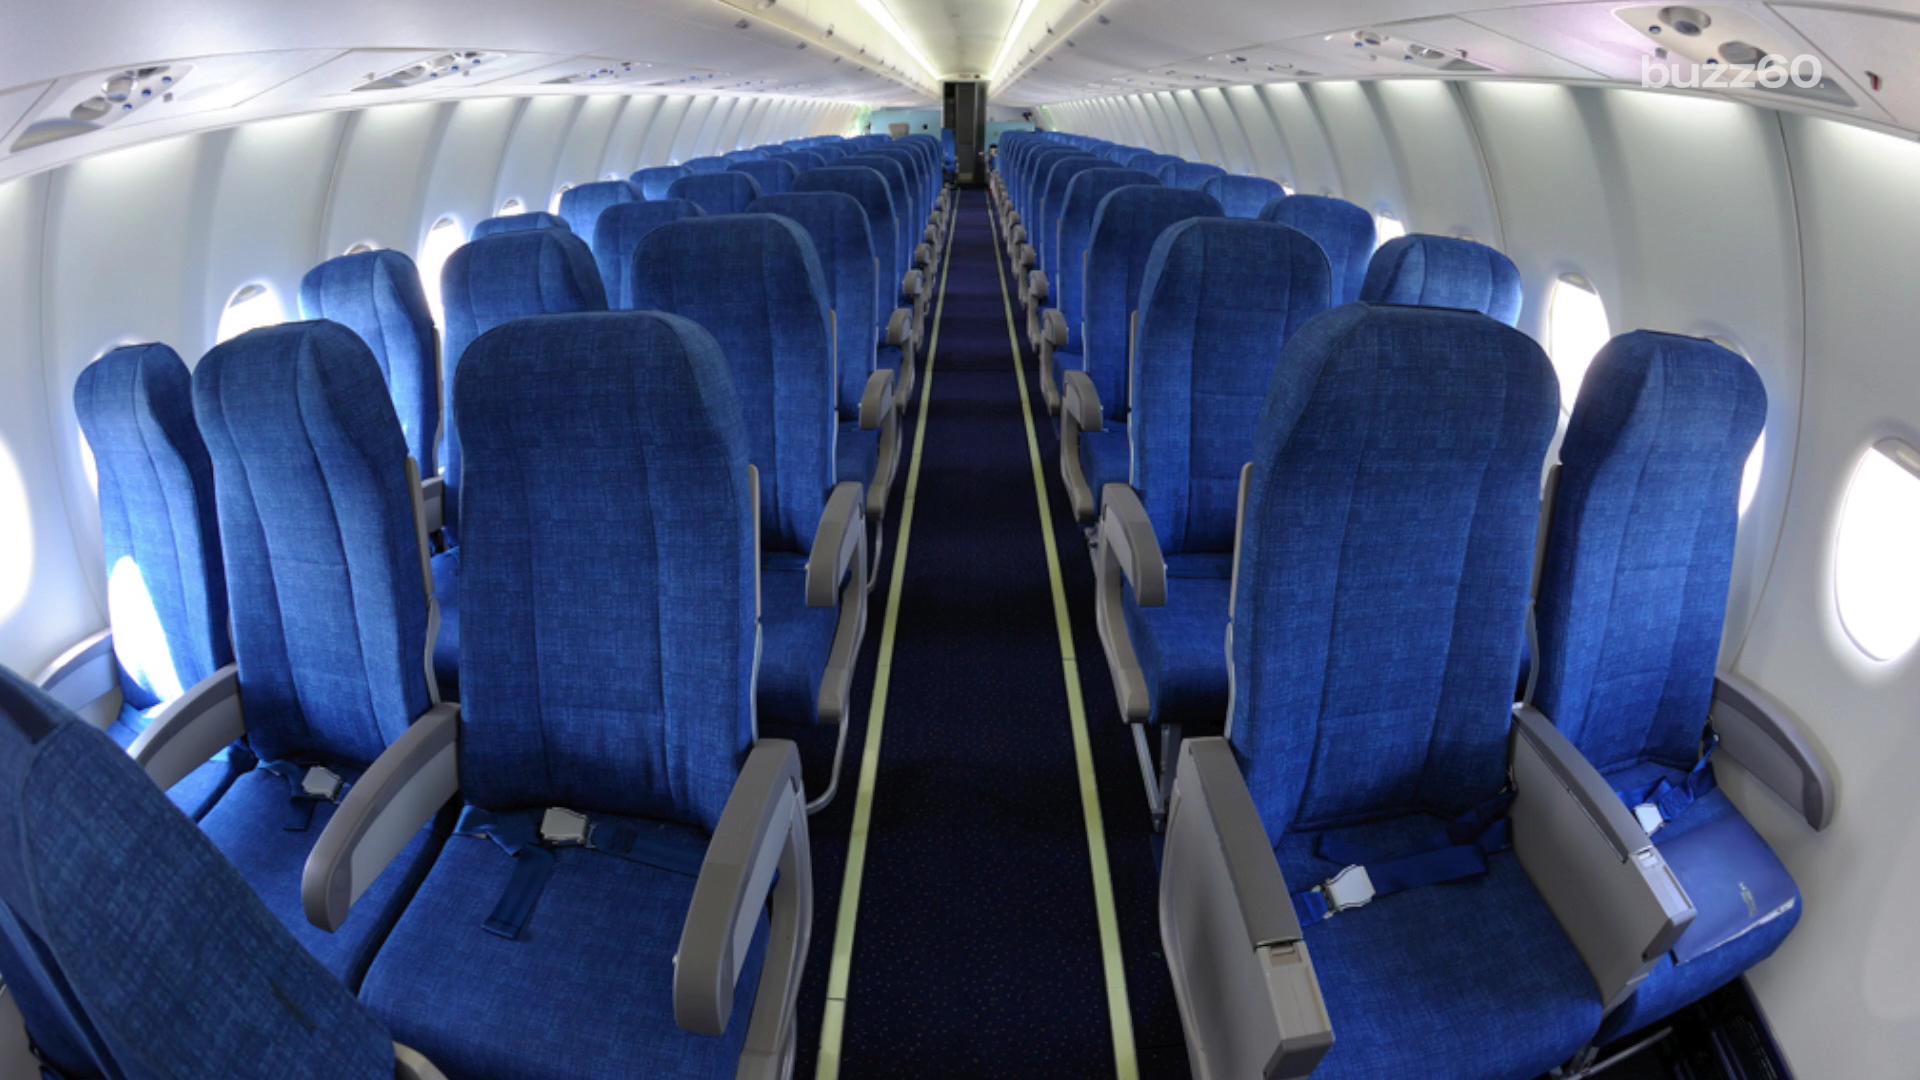 These Airlines Give You The Most Legroom